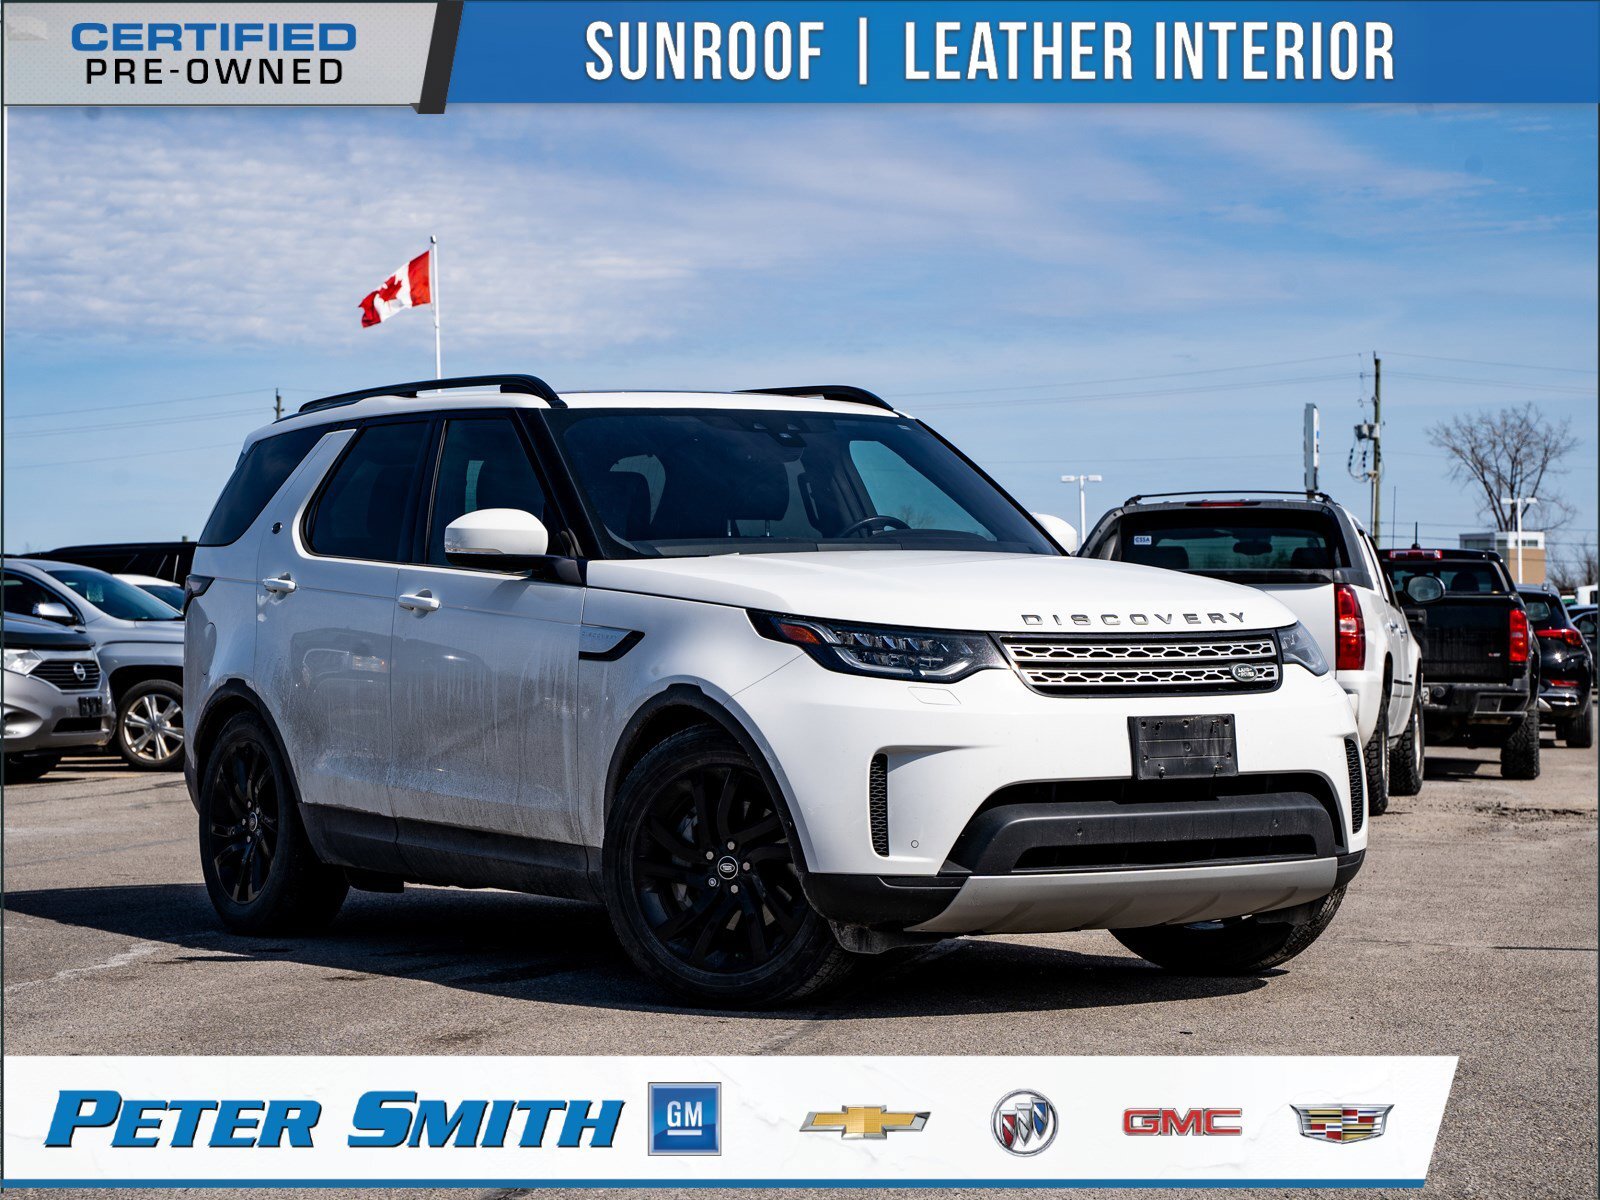 2019 Land Rover Discovery HSE - 3.0L Si6 V6 Supercharged | Sunroof | Heated 